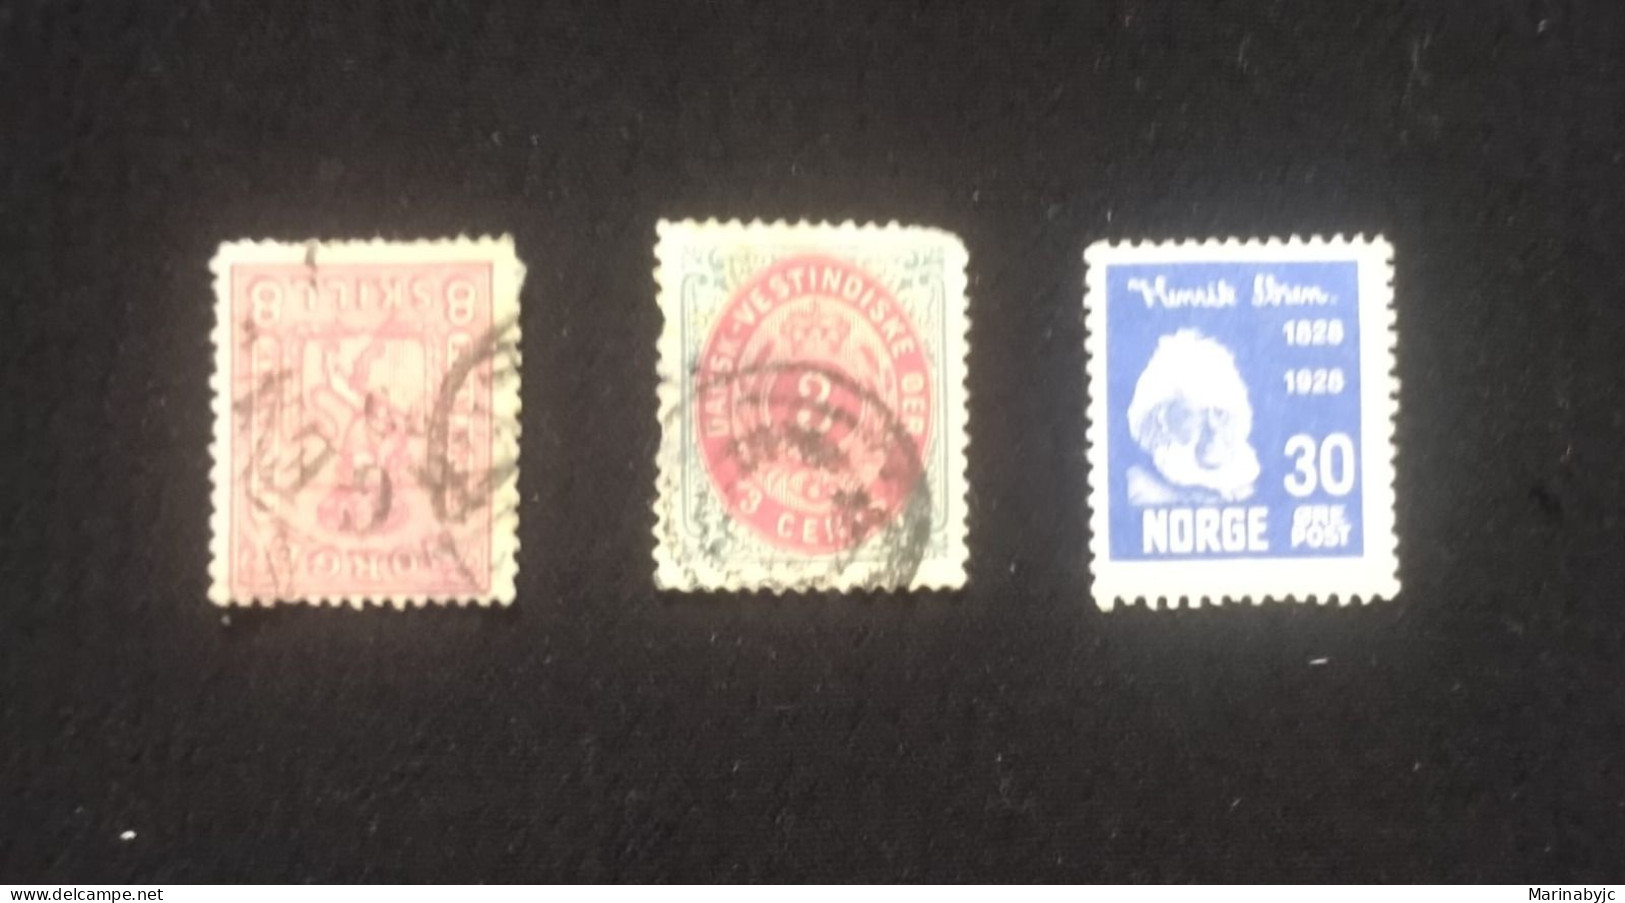 C) 15A, 20, 138. 1867, 1902, 1928. NORWAY AND DENMARK, MULTIPLE STAMPS. USED - Usado